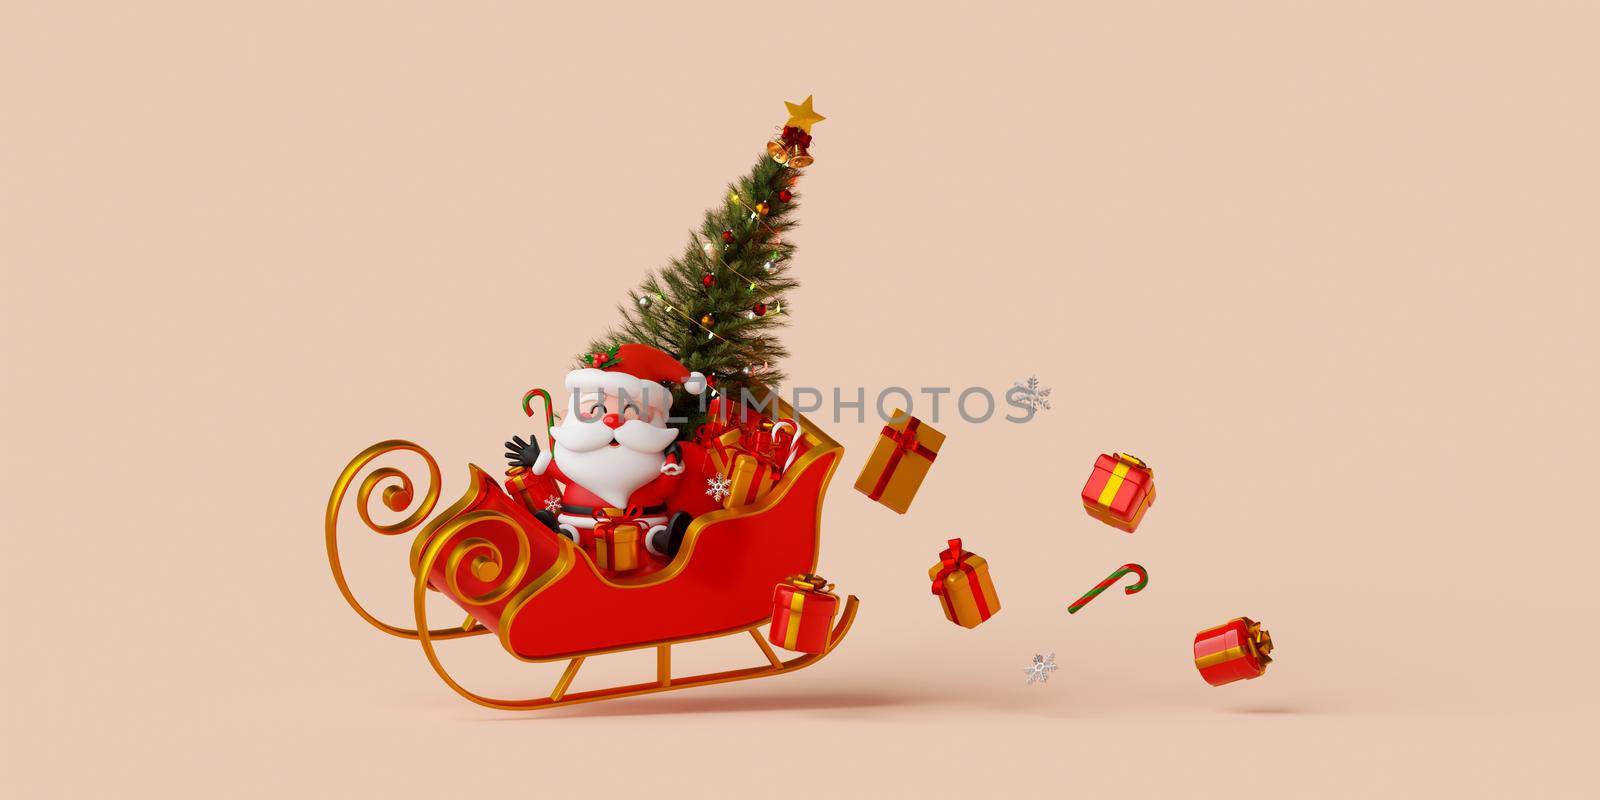 3d illustration Christmas banner of Santa Claus on sleigh with gift box and Christmas tree by nutzchotwarut